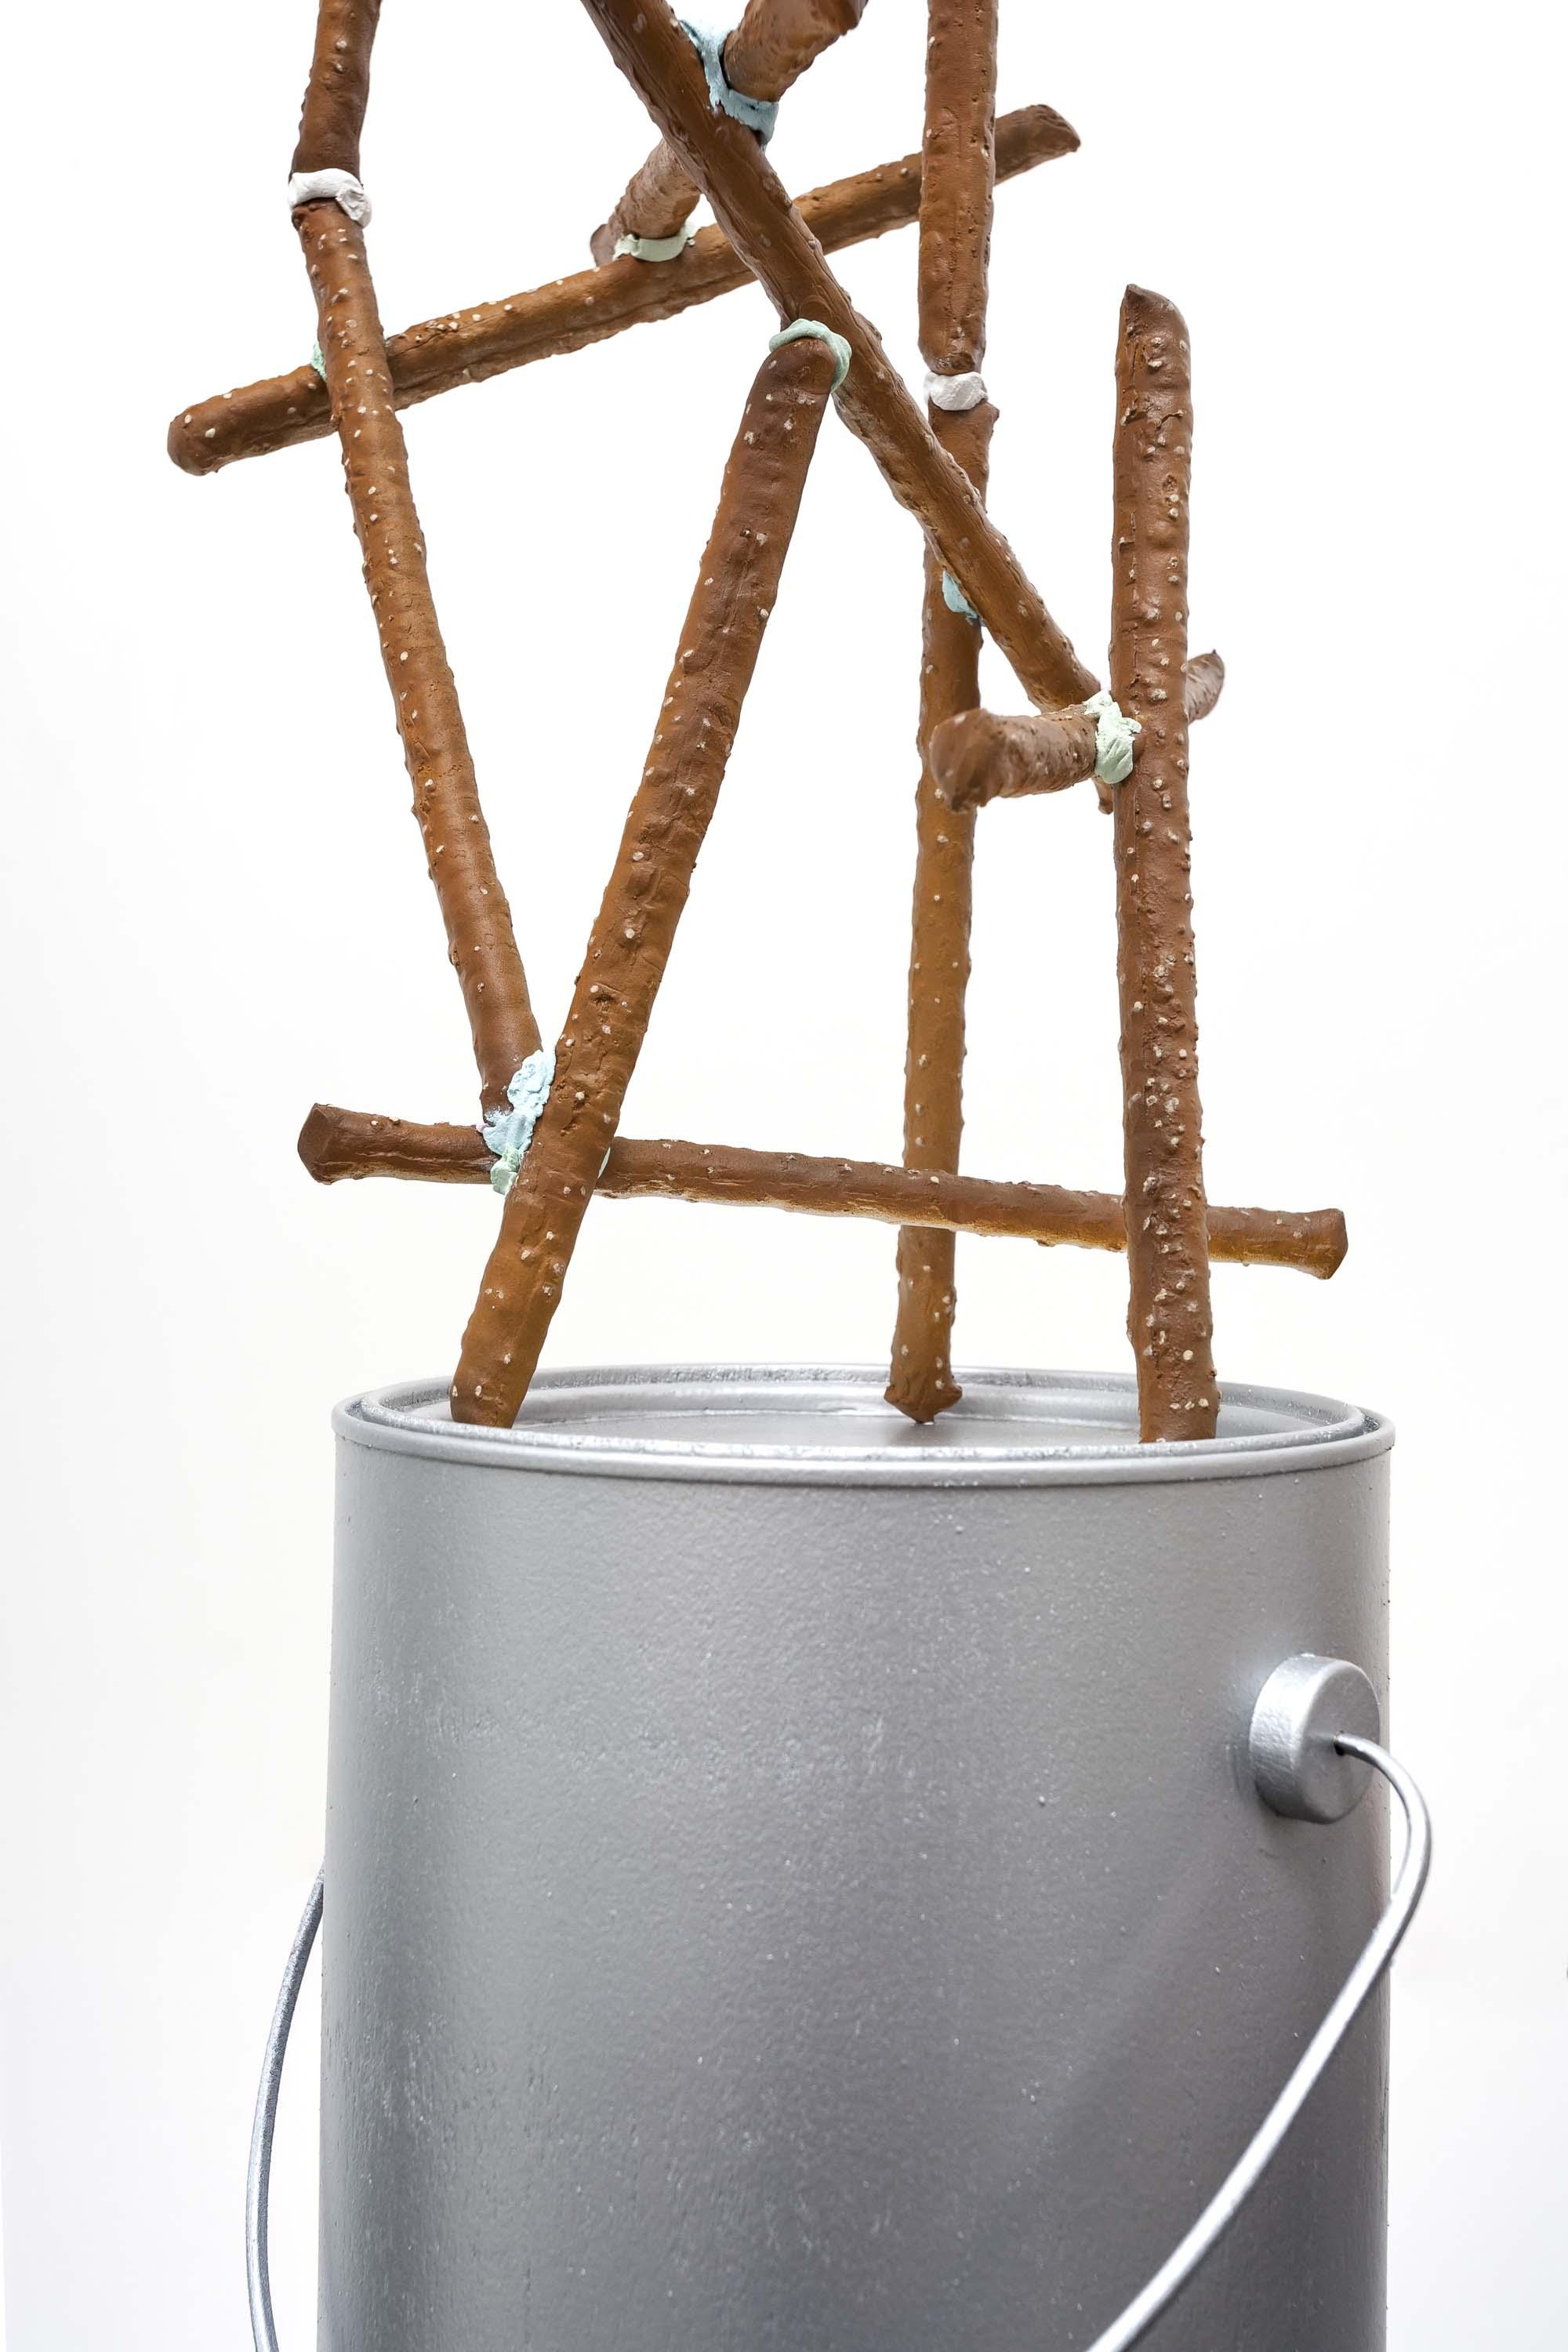 Brown pretzel sticks with specks of white are glued together in a stacked formation, and are balanced atop a silver paint can.